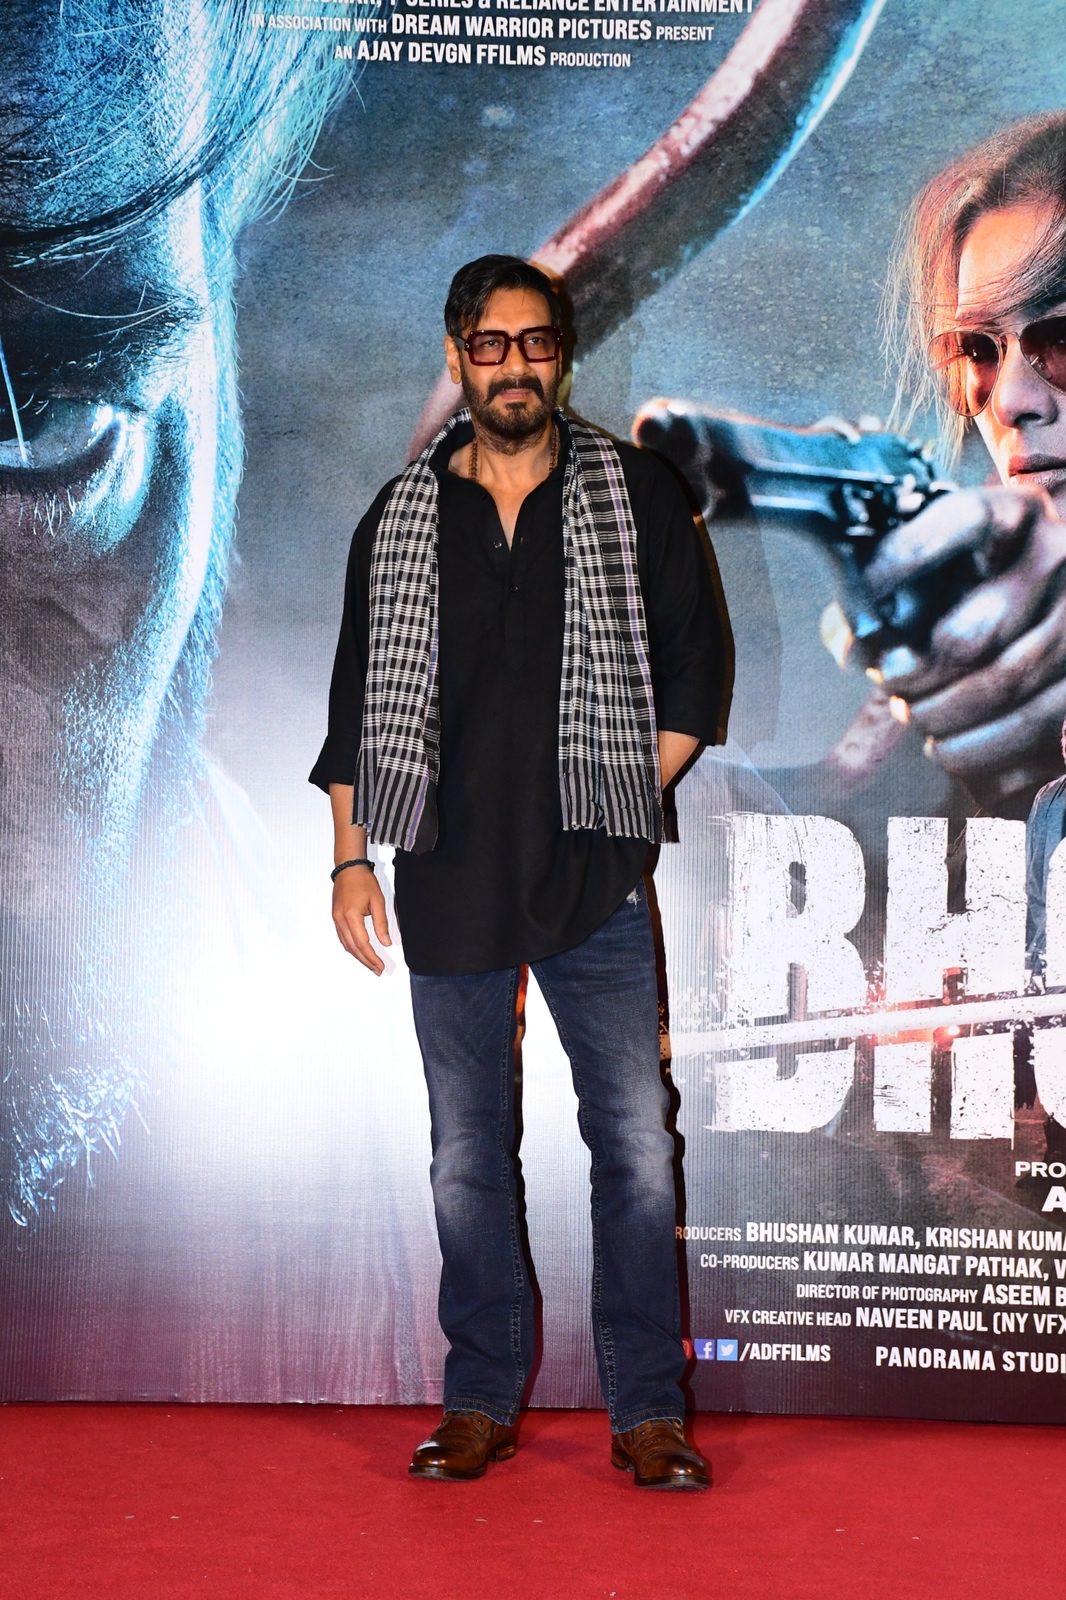 The second teaser of Bholaa displays the action-packed world of Ajay Devgn’s Bholaa!